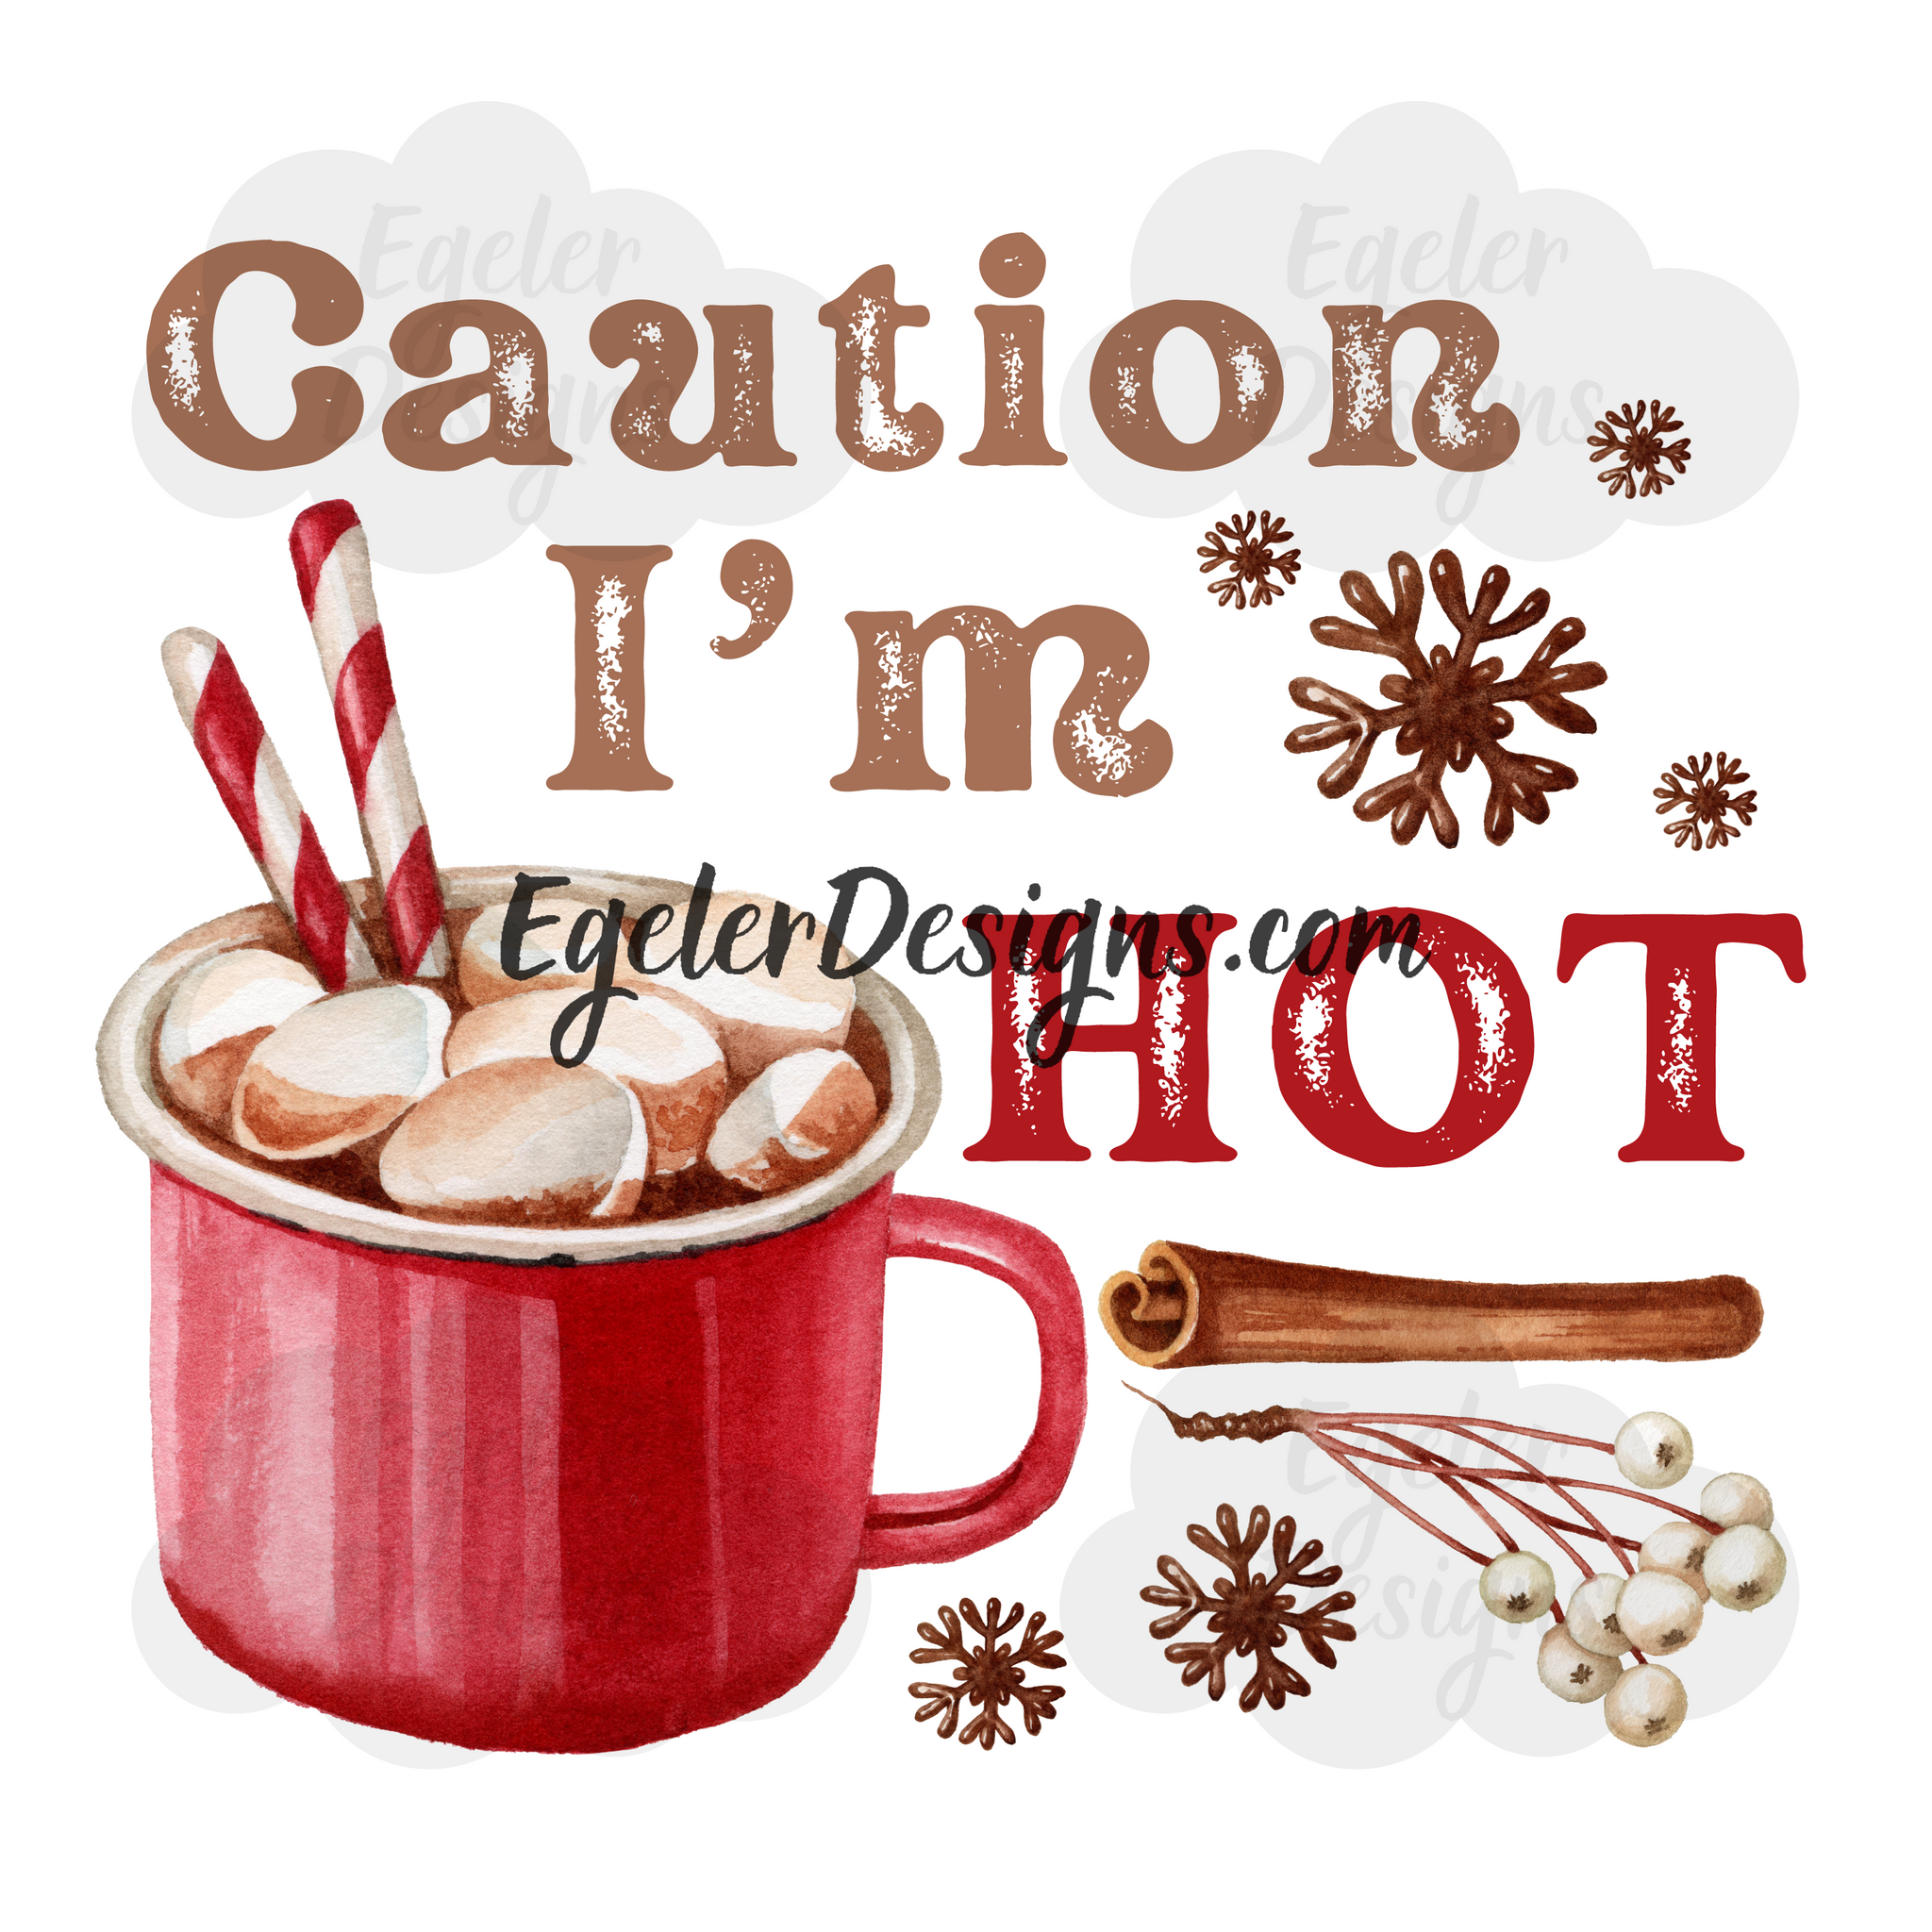 Caution I’m Hot PNG